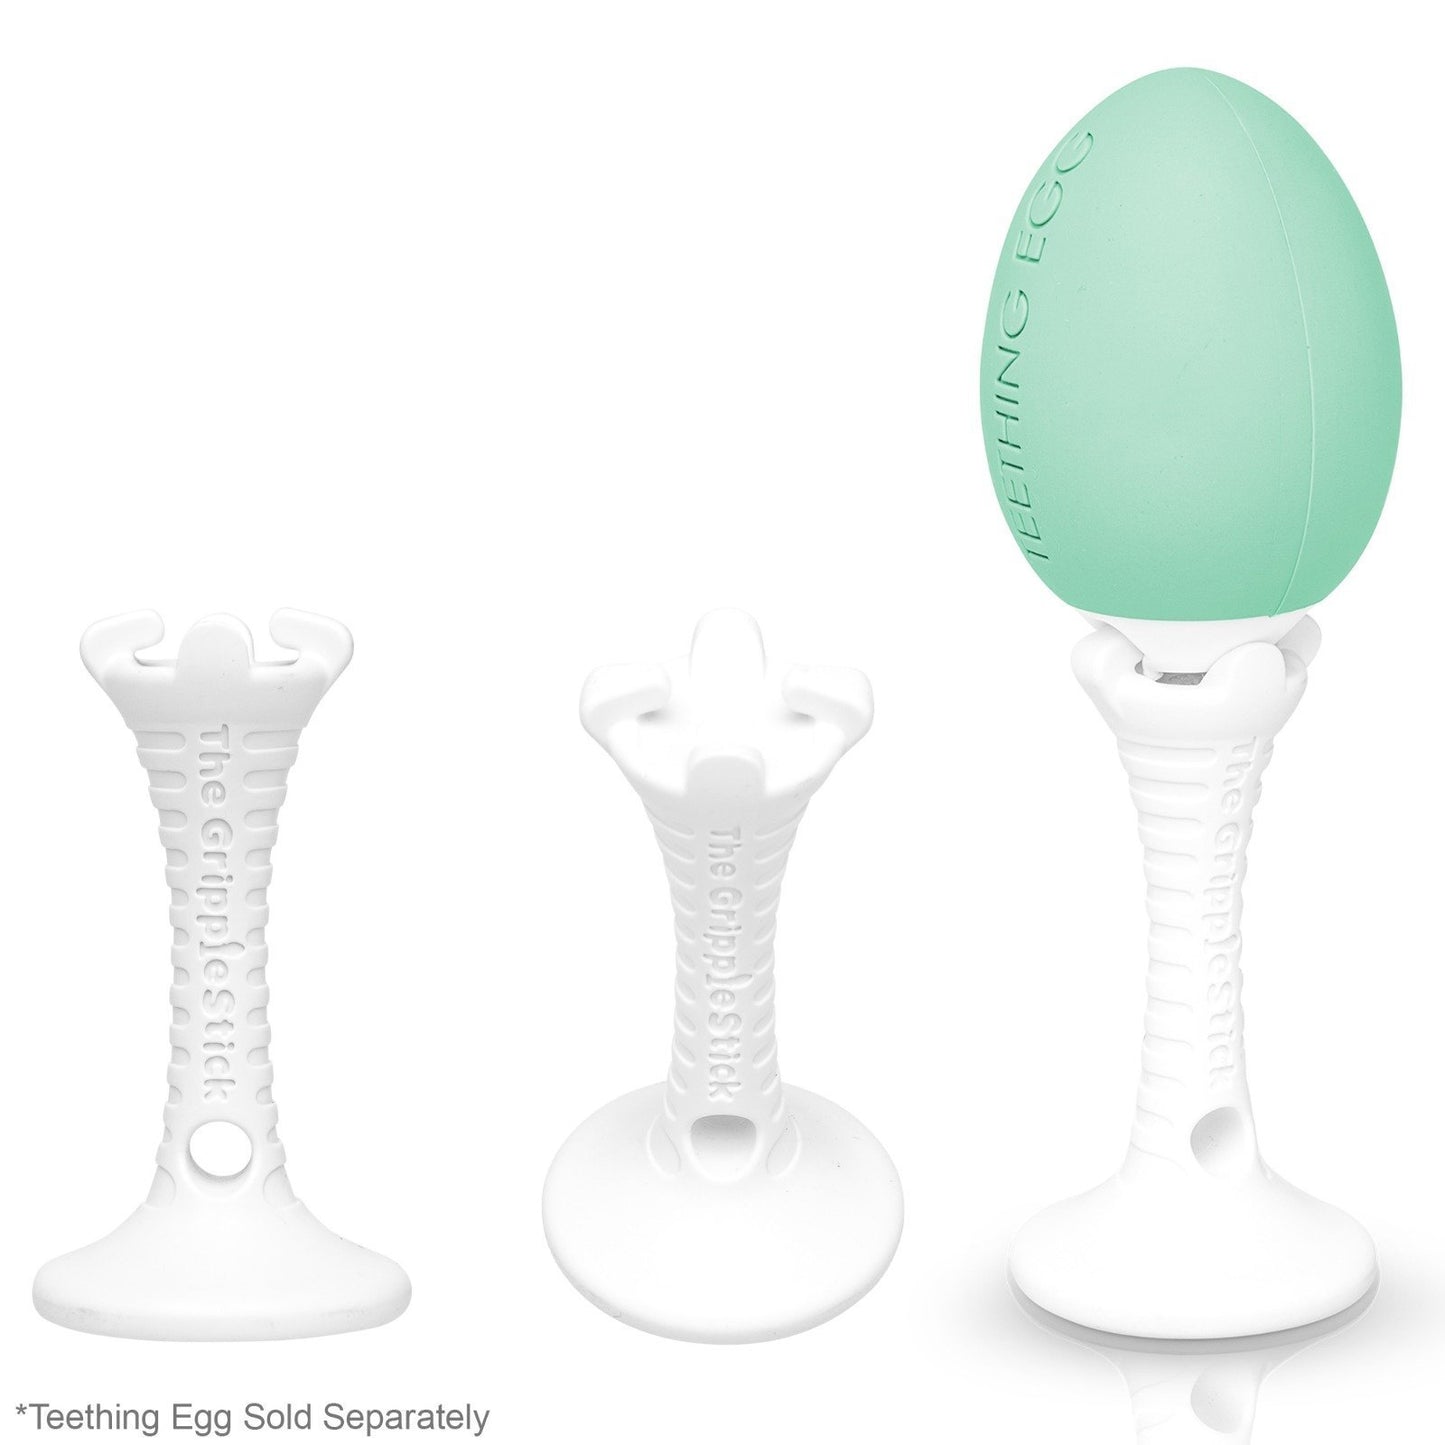 The Grippie Stick by The Teething Egg